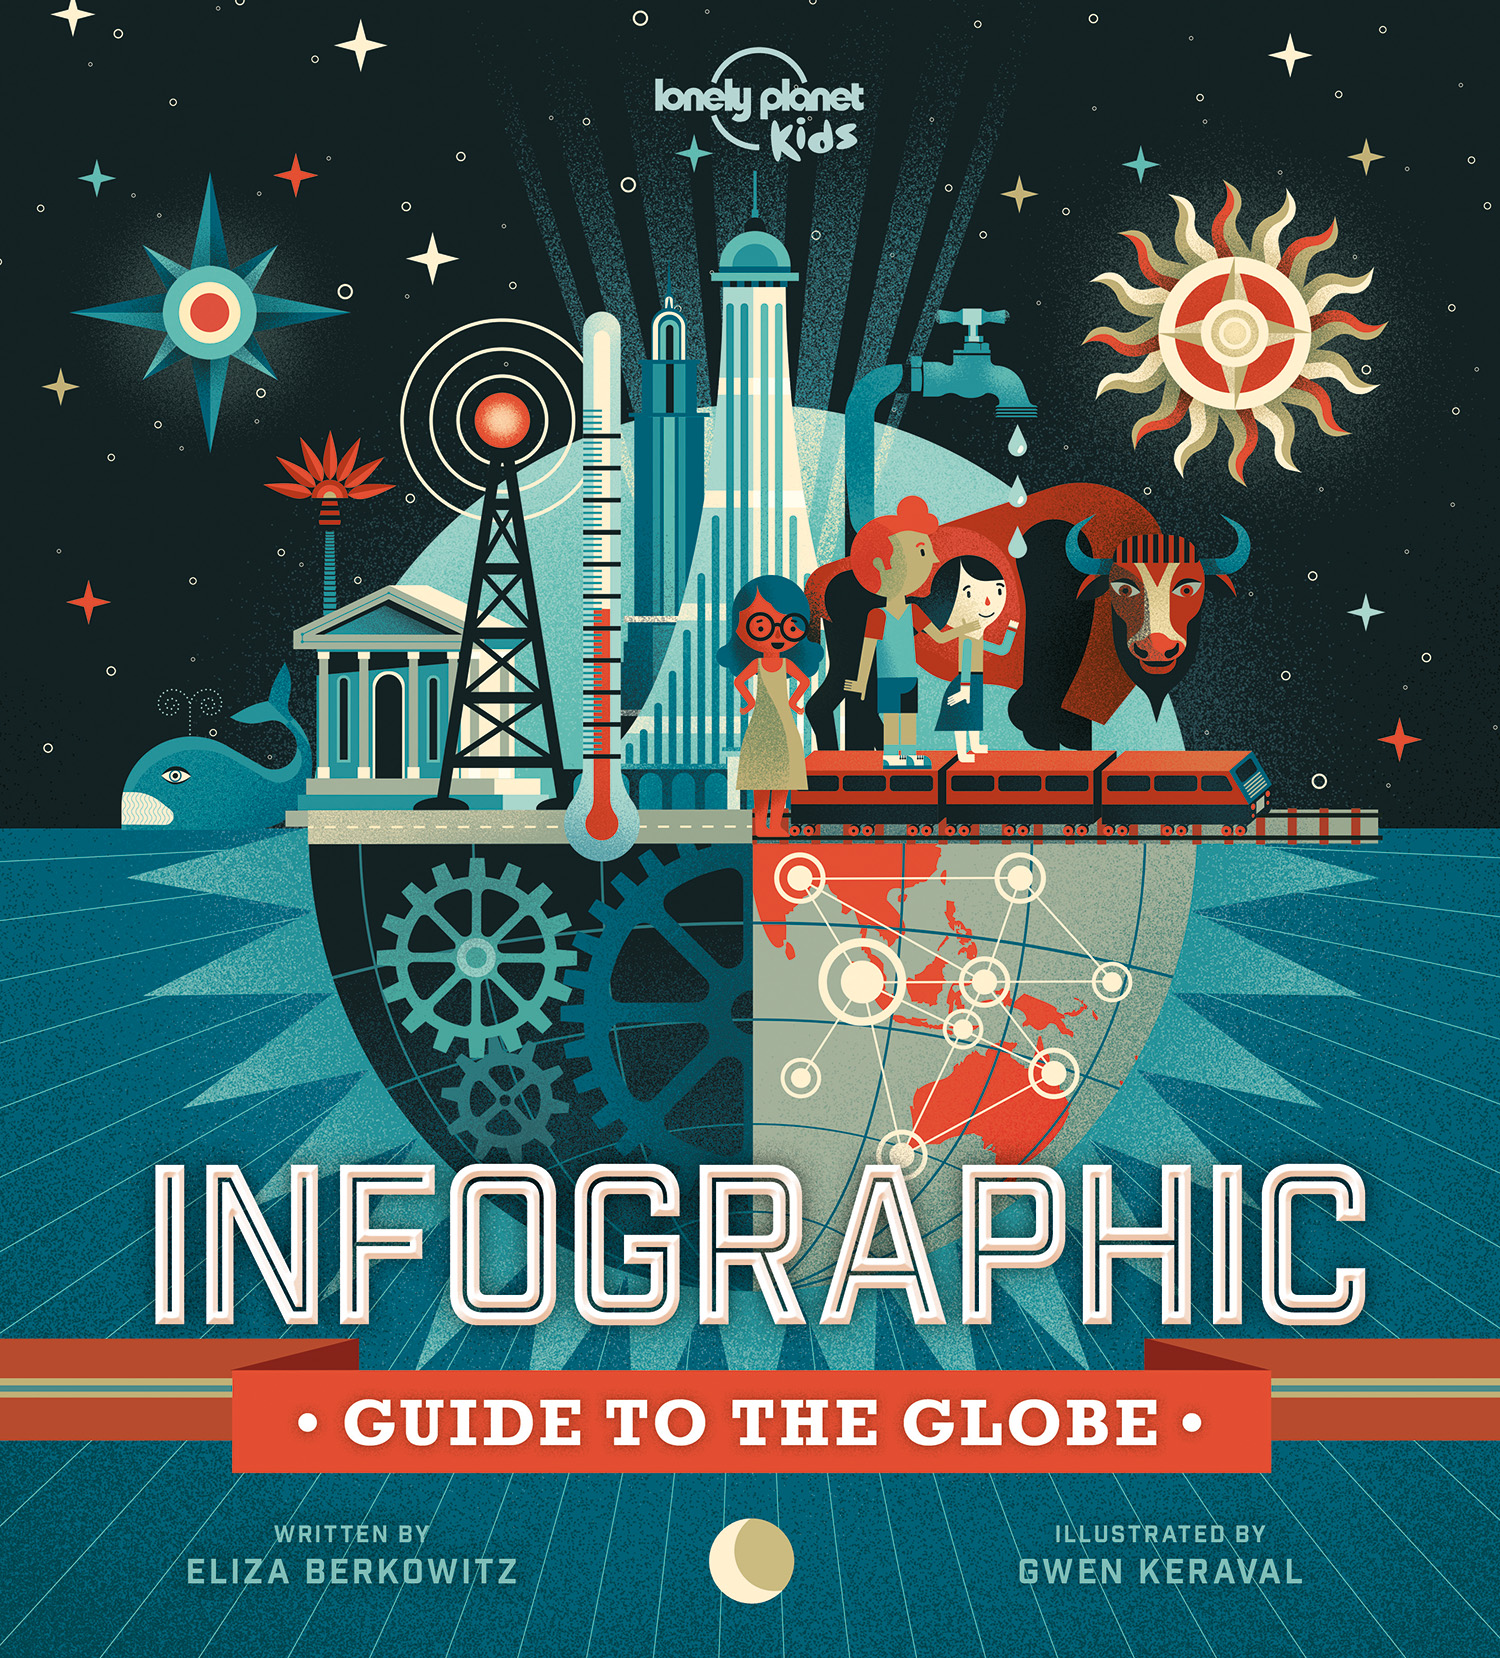 https://rappart.com/wp-content/uploads/2020/08/Infographic_Guide_To_The_Globe_cover-100x100.jpg